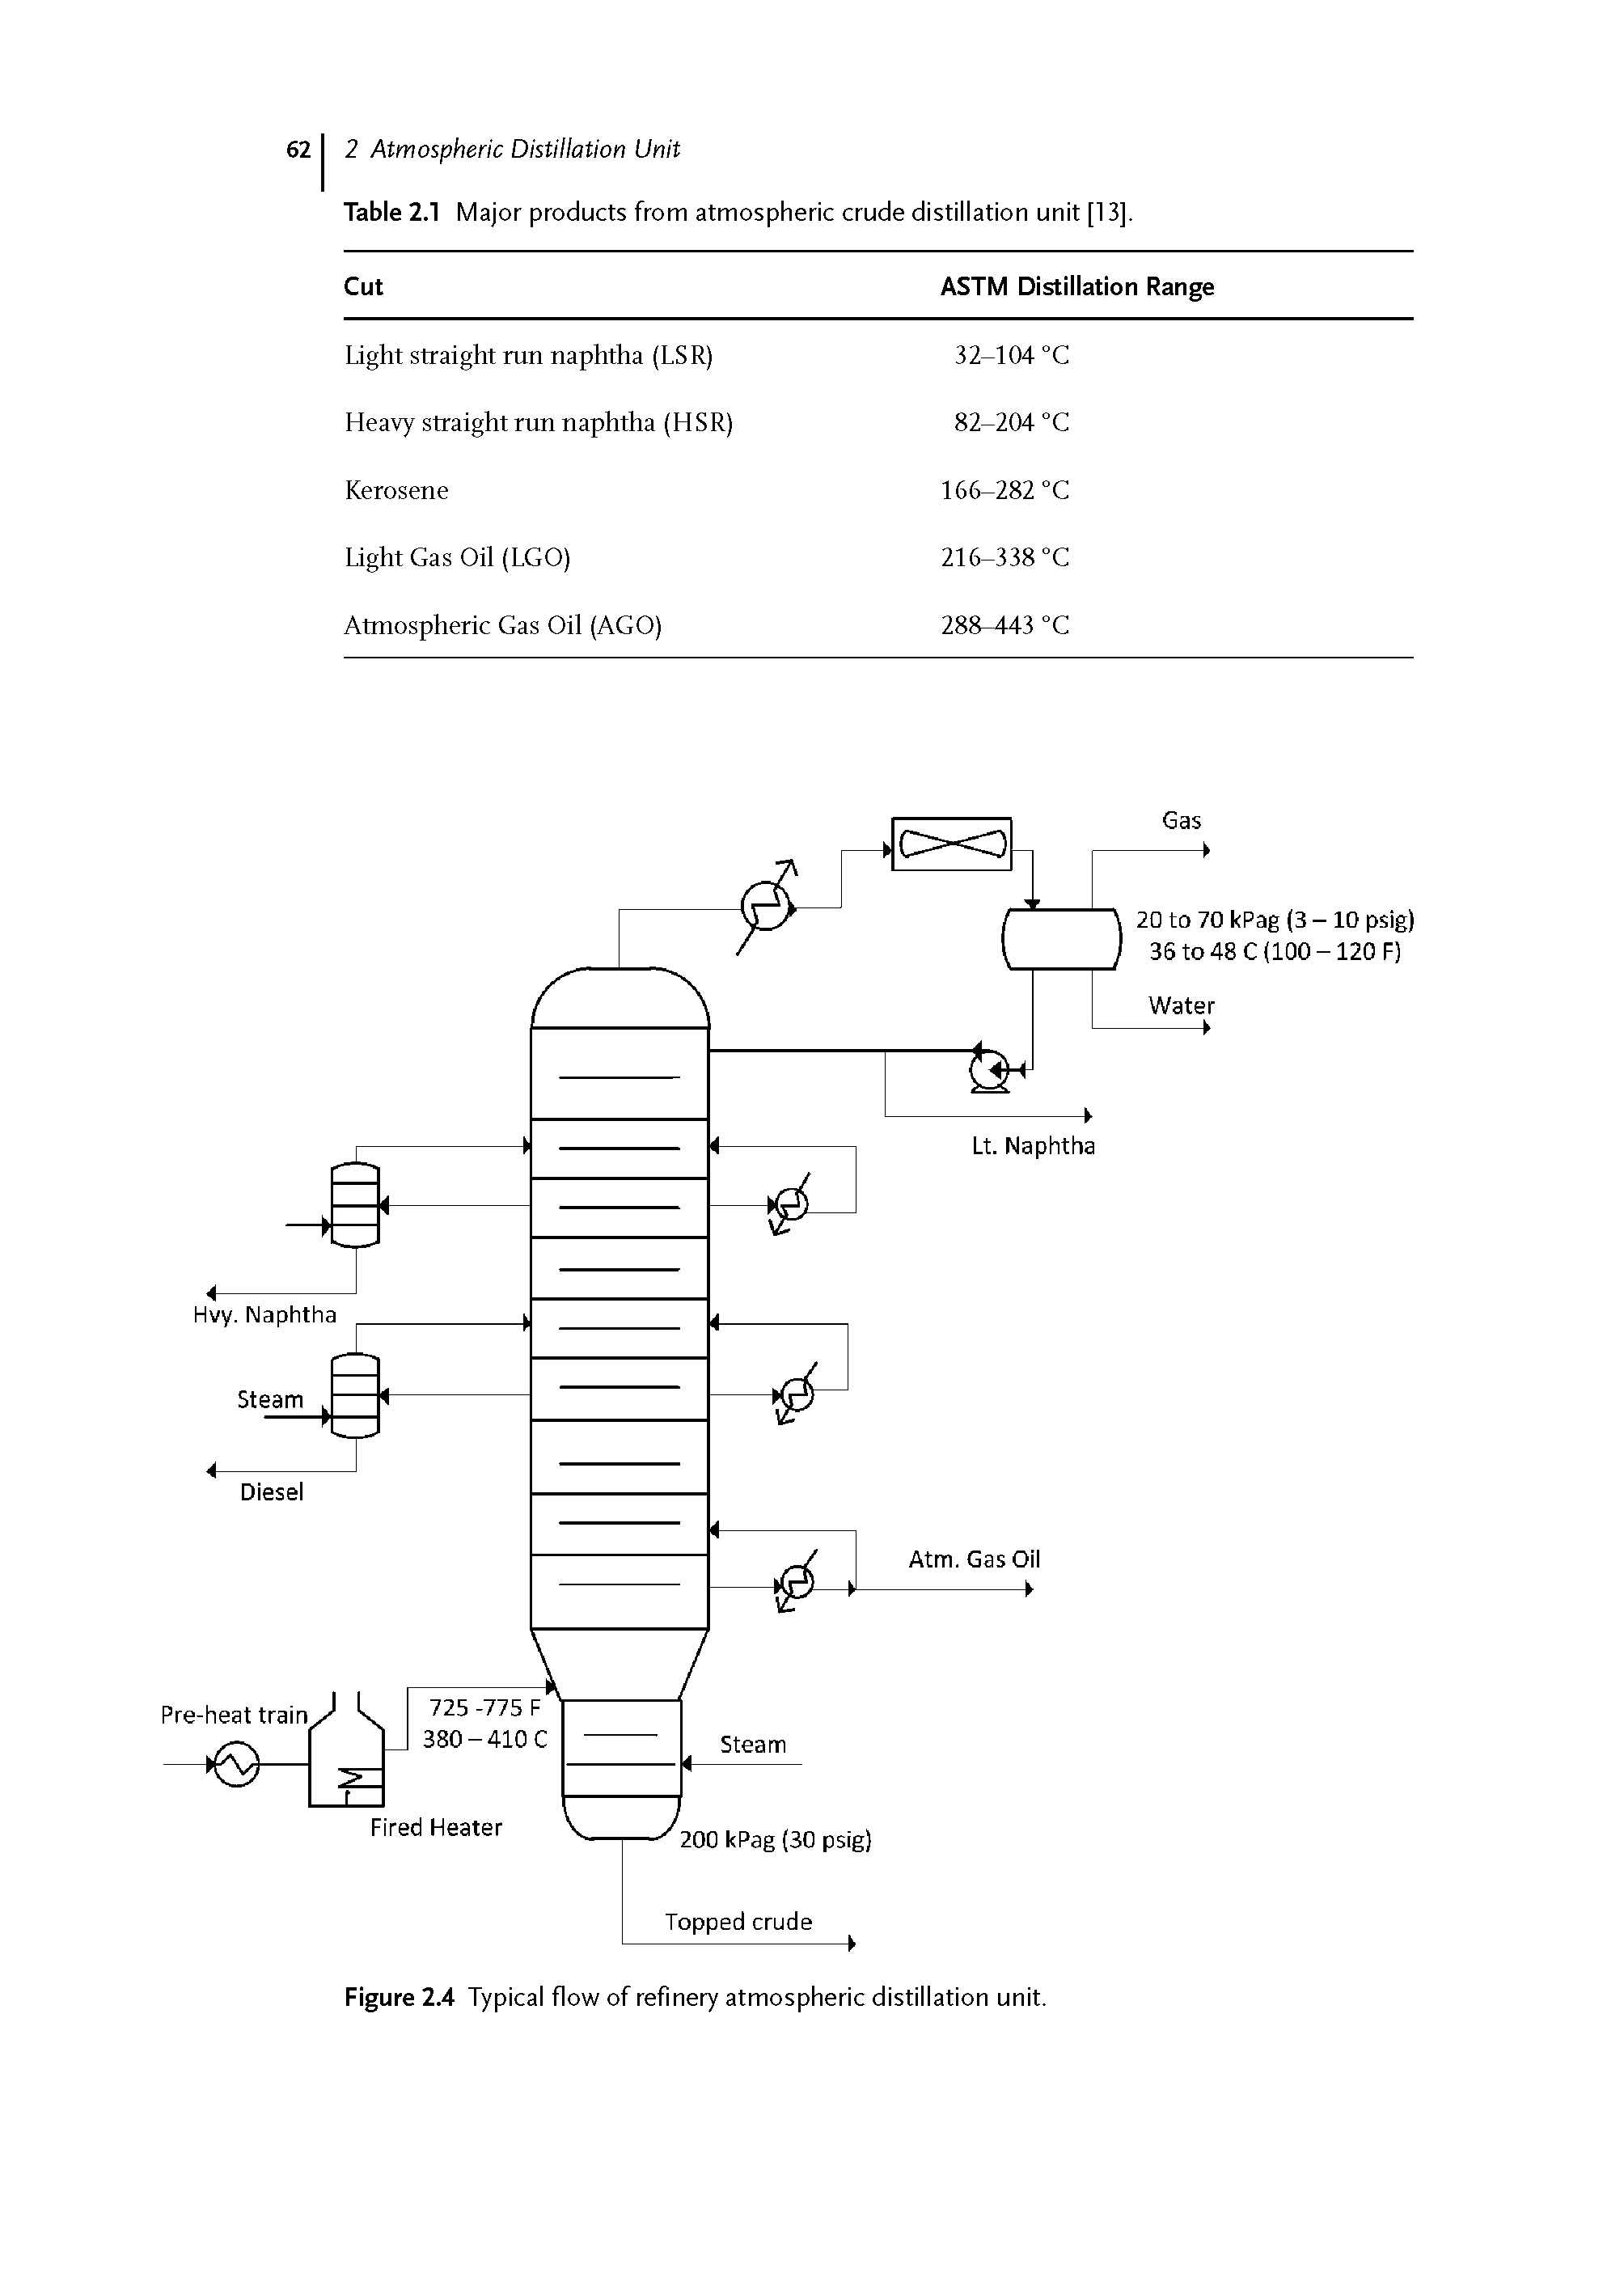 Figure 2.4 Typical flow of refinery atmospheric distillation unit.